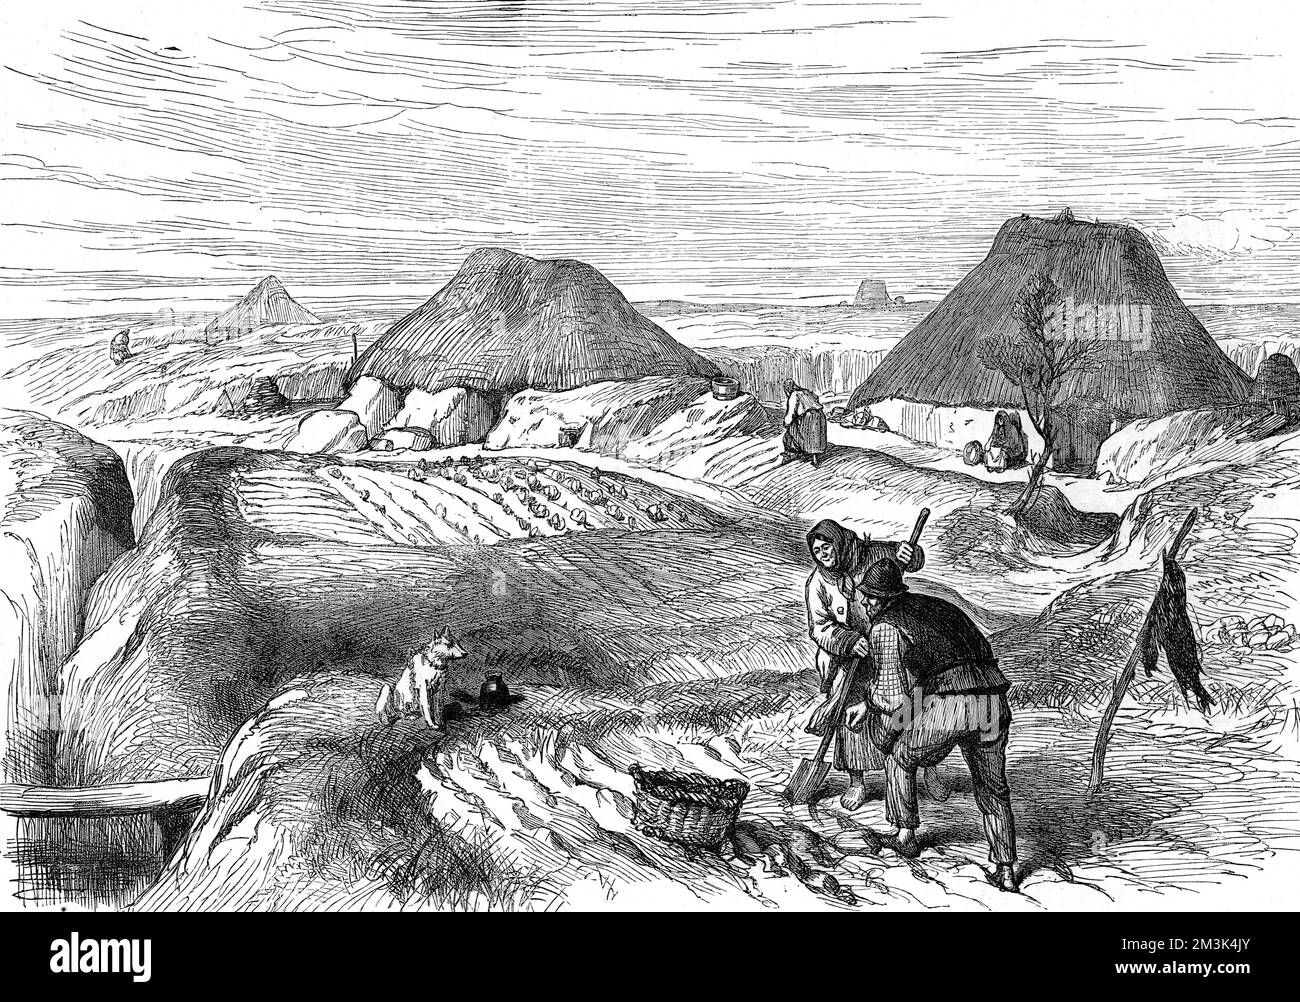 Cultivation in a bog village in County Roscommon. Peasants farm the land while a dog looks on. Village dwellings border the fields and other women can be seen in the background working on the land. Stock Photo